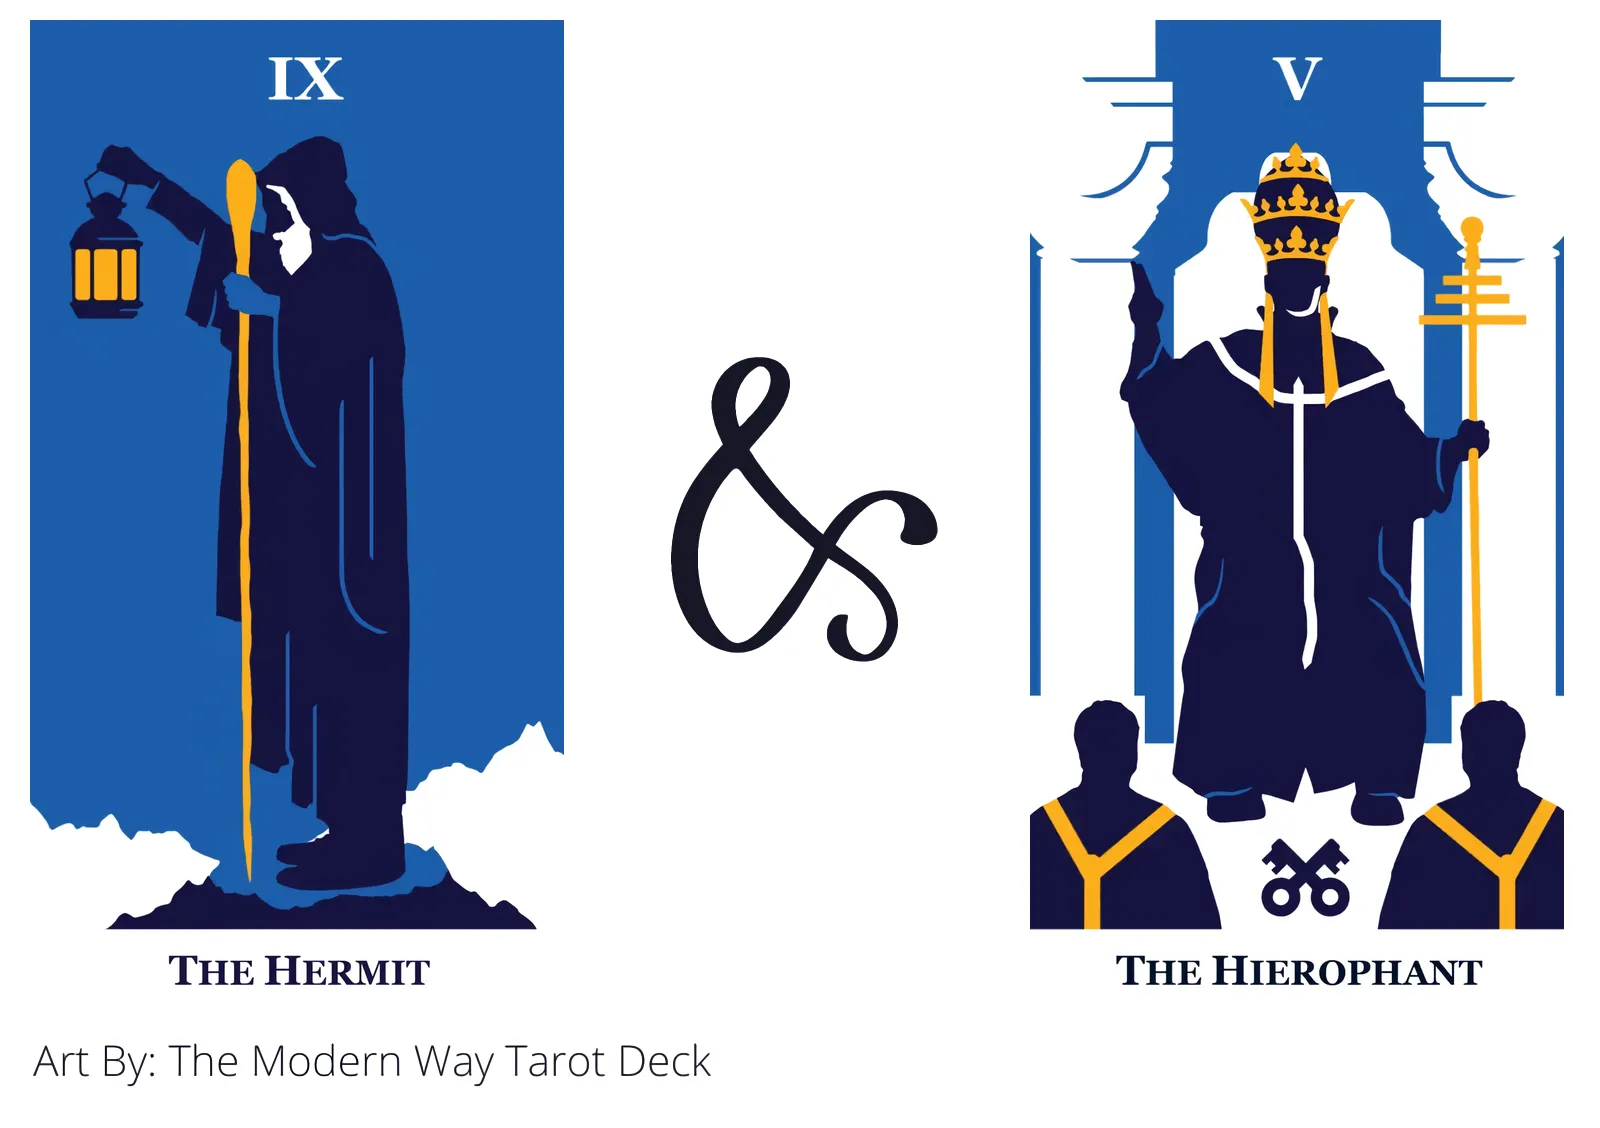 the hermit and the hierophant tarot cards together